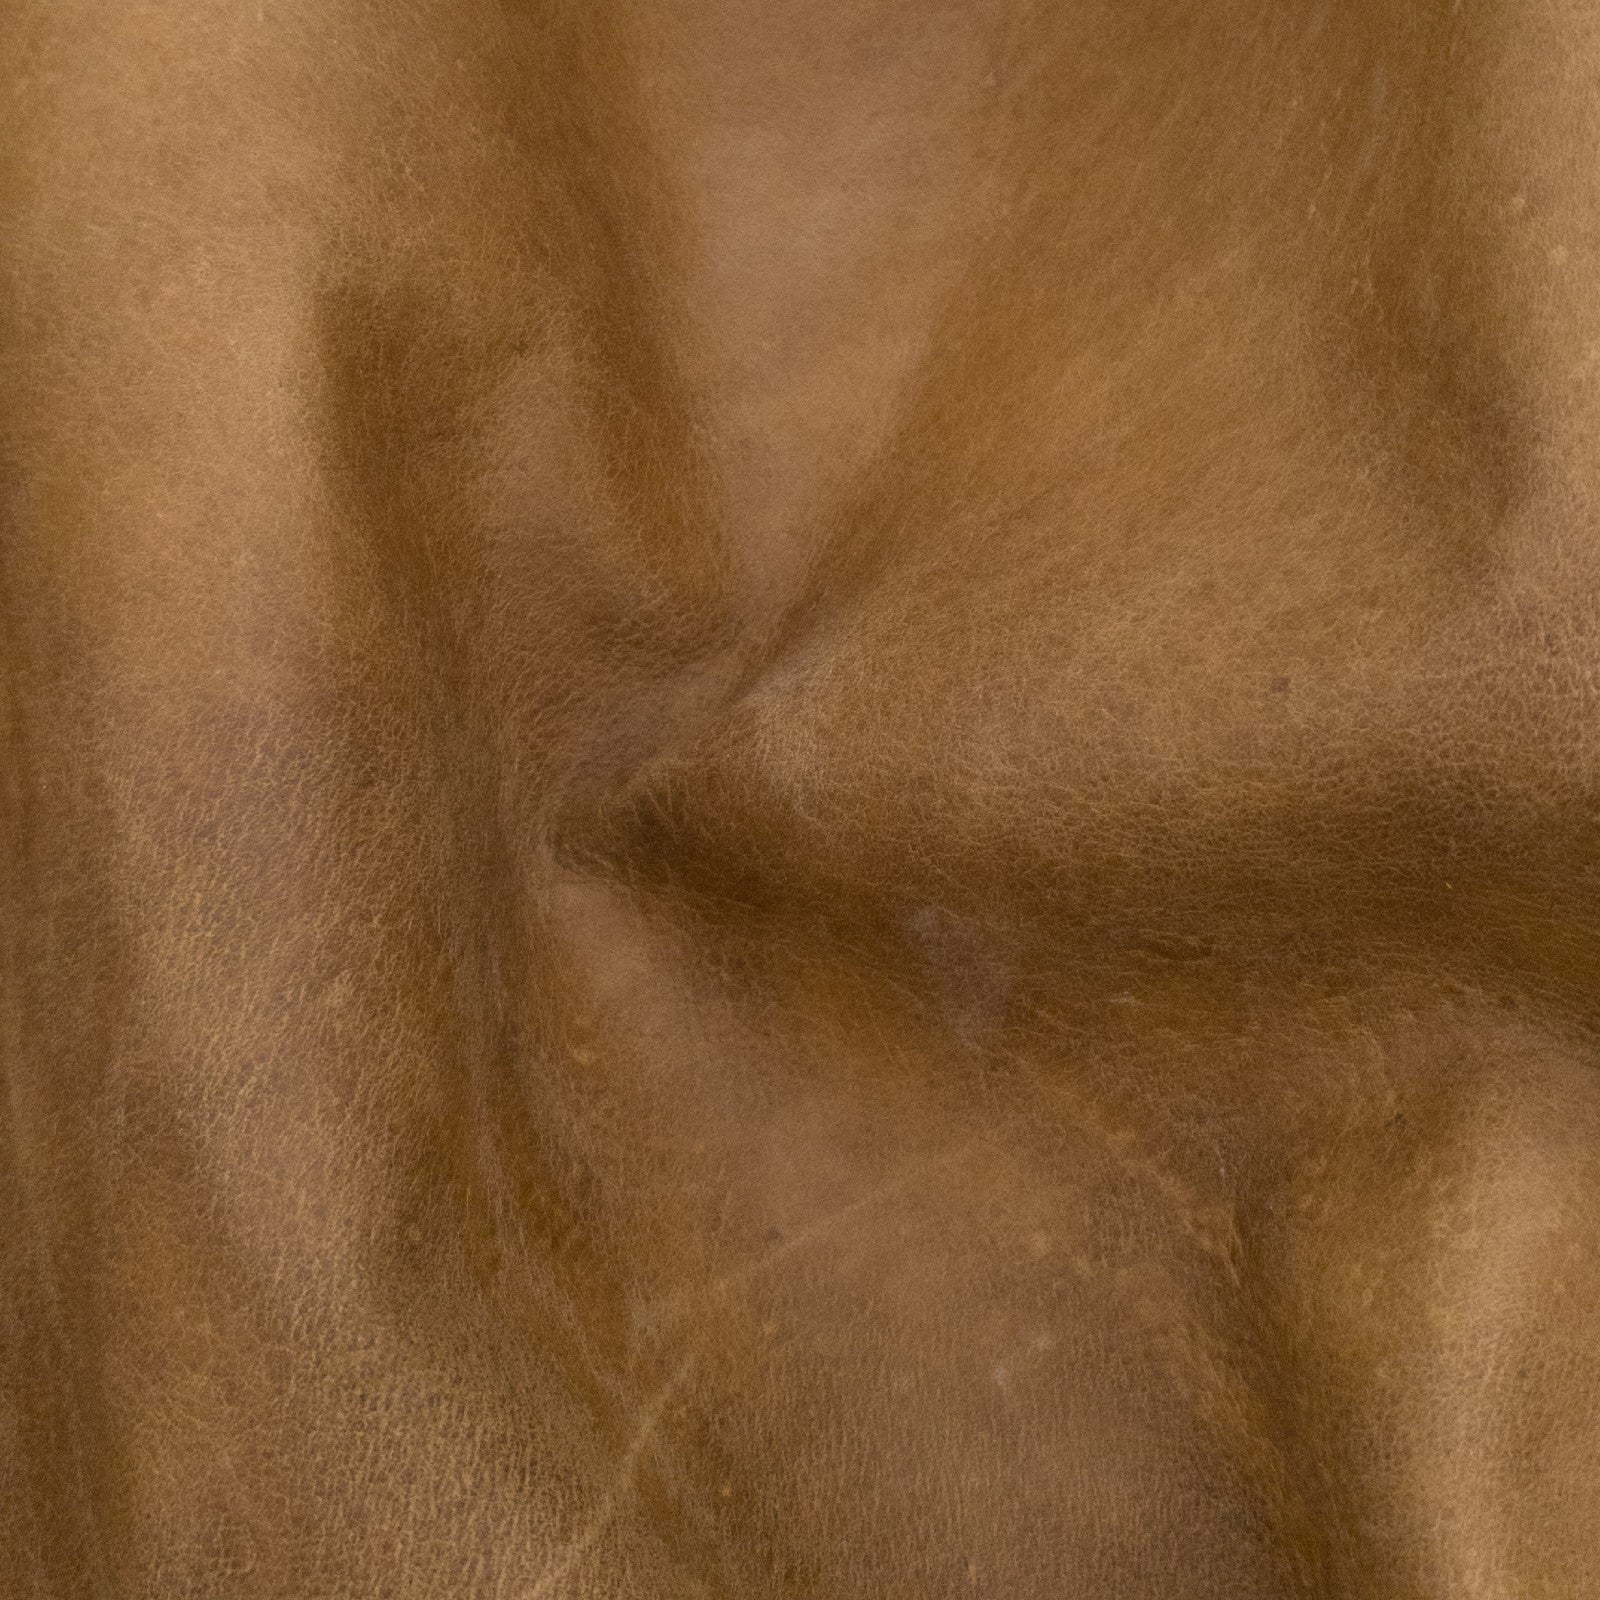 Light-Medium Brown, 2-4 oz, 3-10 Sq Ft, Upholstery Cow Project Pieces, Aged Brown (3-4oz) / 3-6 Sq ft | The Leather Guy